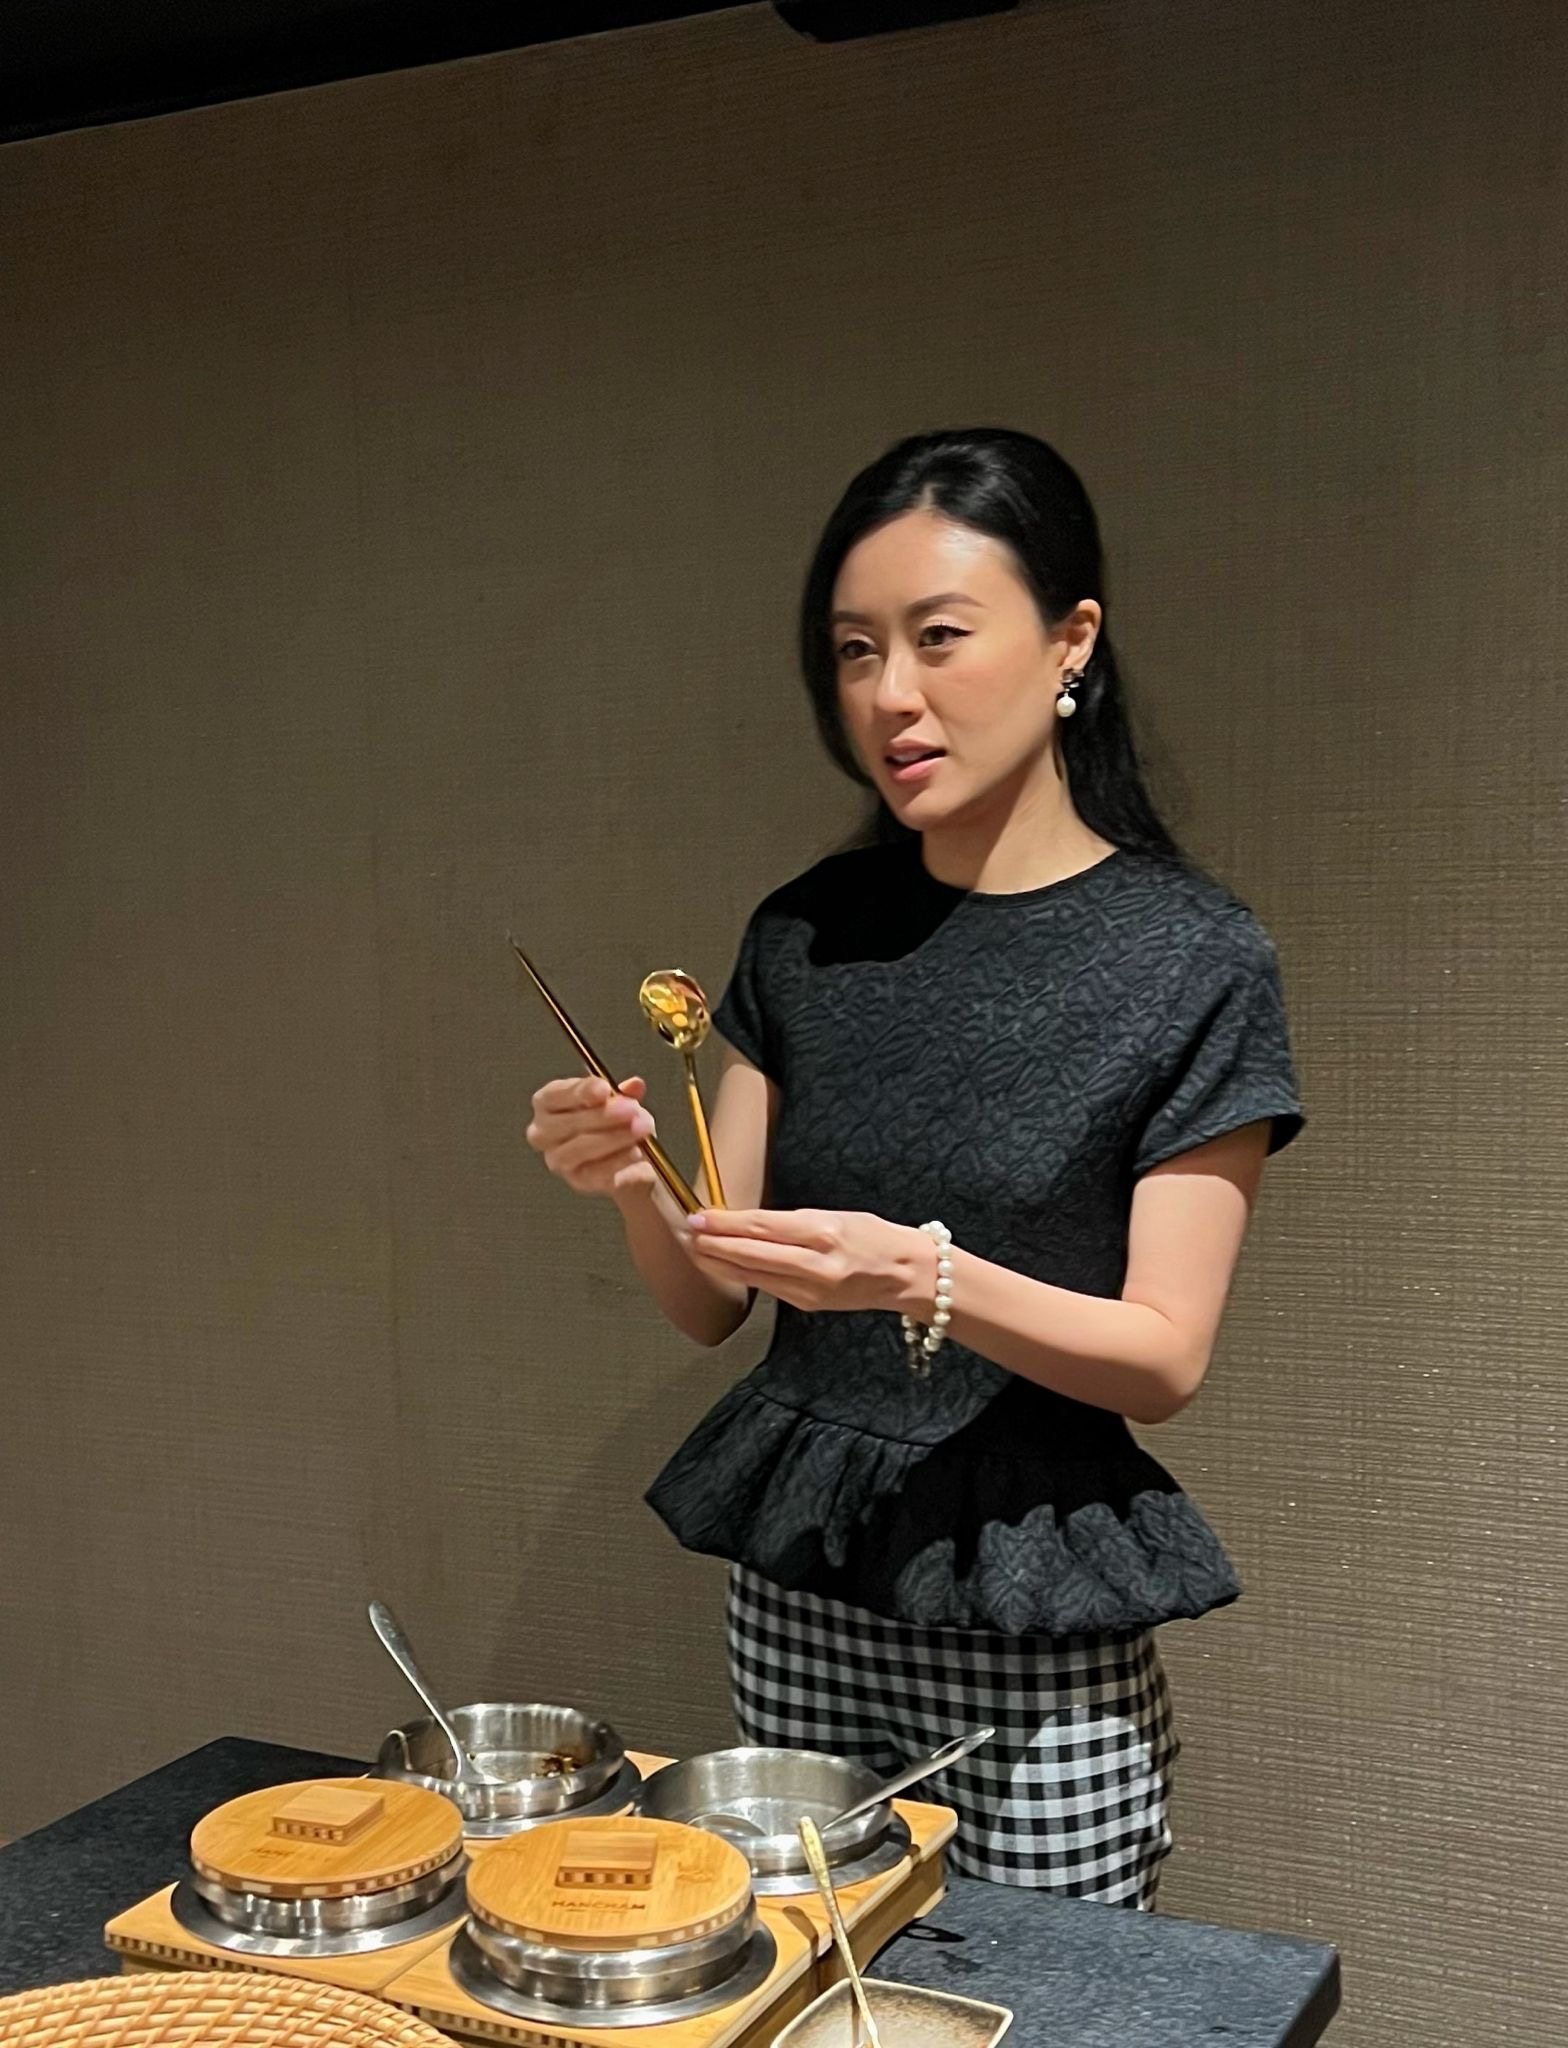 Piano Mok explains how Korean table settings feature chopsticks and an elongated spoon, which is used to eat rice and stew. The etiquette consultant is familiar with the dining customs of cultures and cuisines across Asia, including Chinese, Japanese and Korean. Photo: Piano Mok